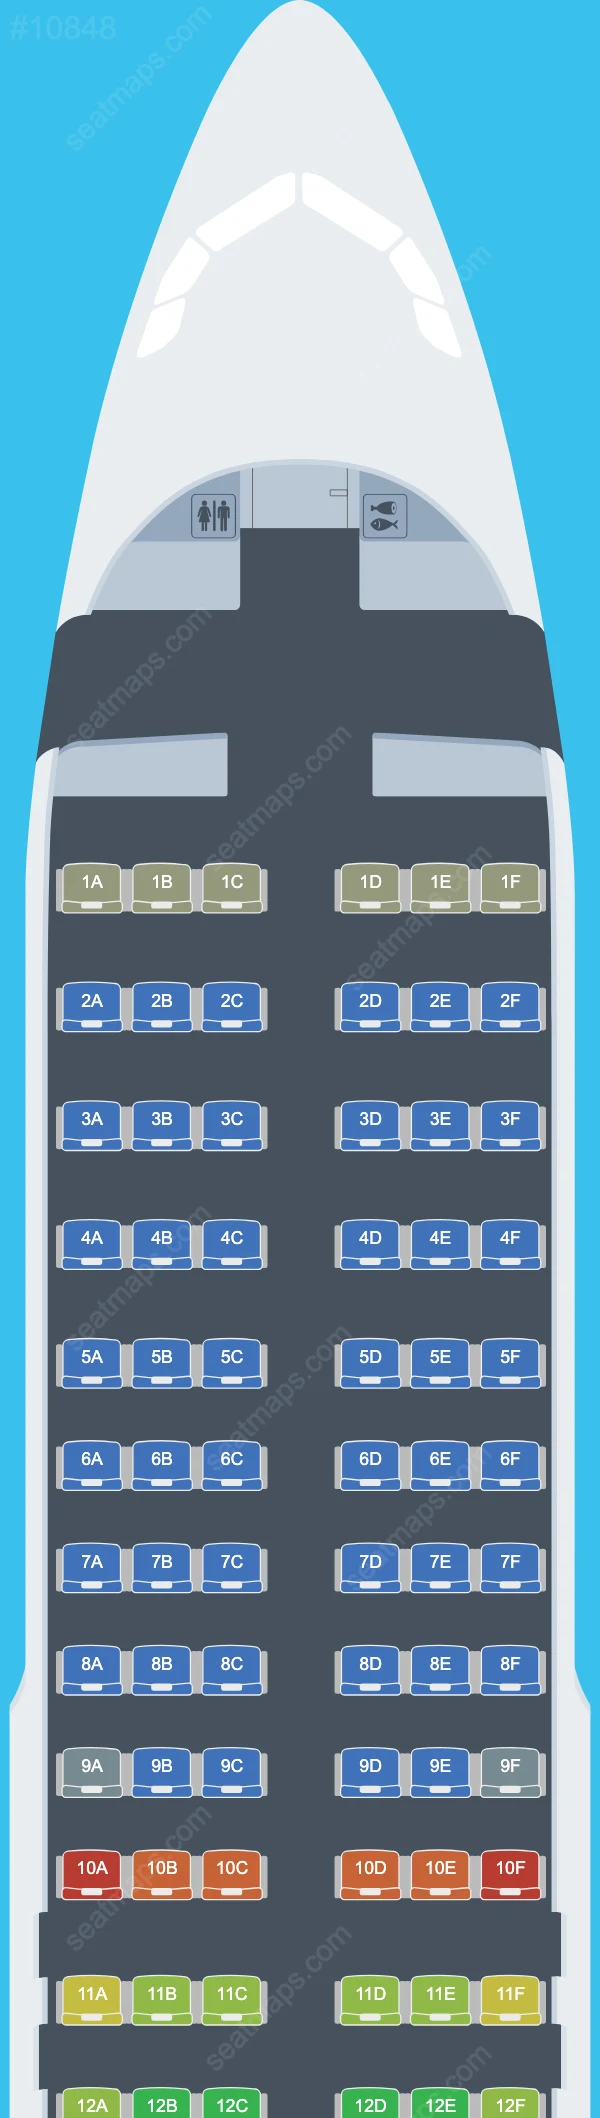 LATAM Airlines Airbus A320 Seat Maps A320-200neo V.1